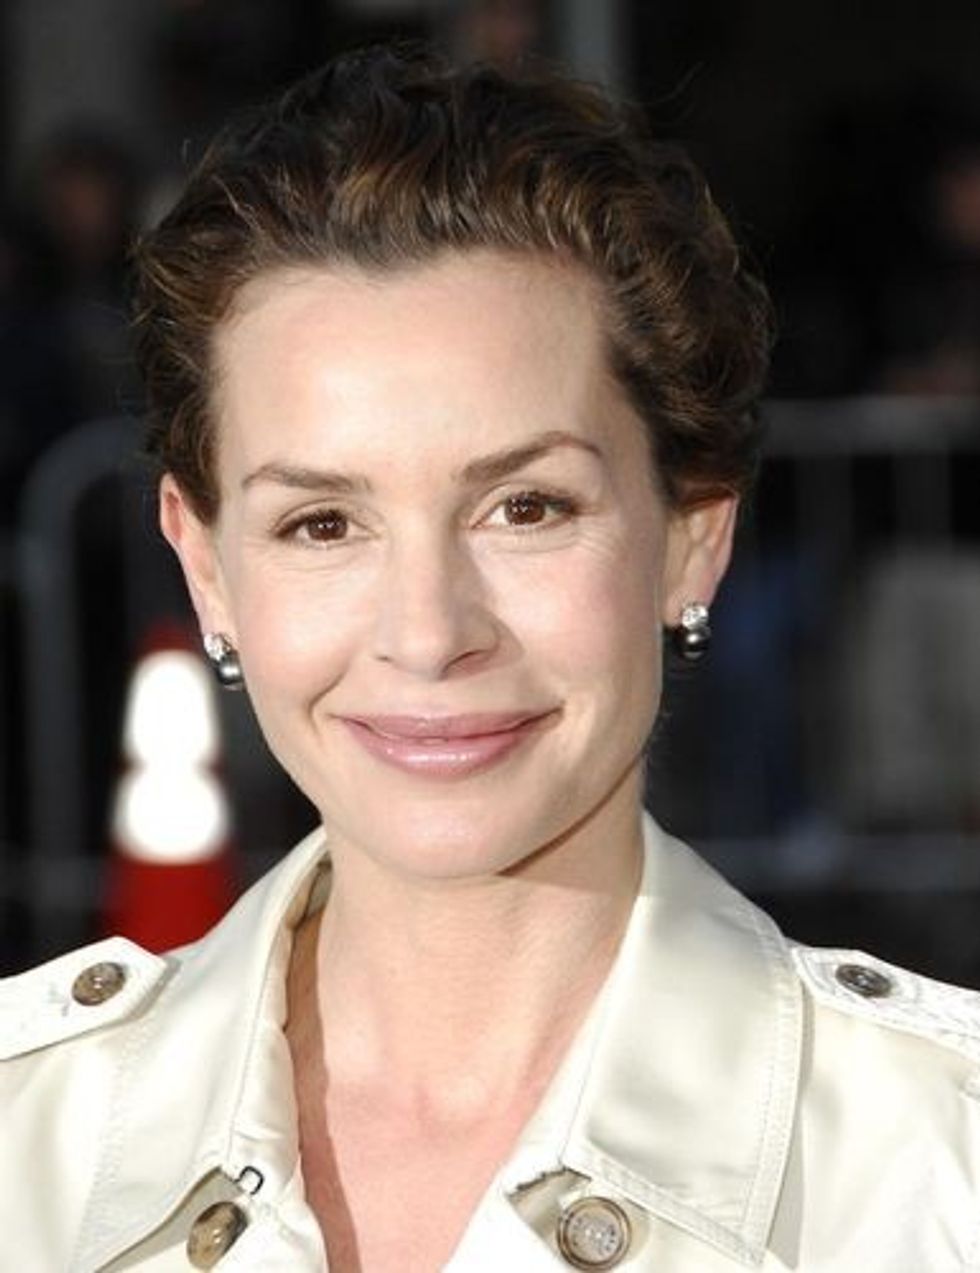 Embeth Davidtz is a popular South African-American actress.